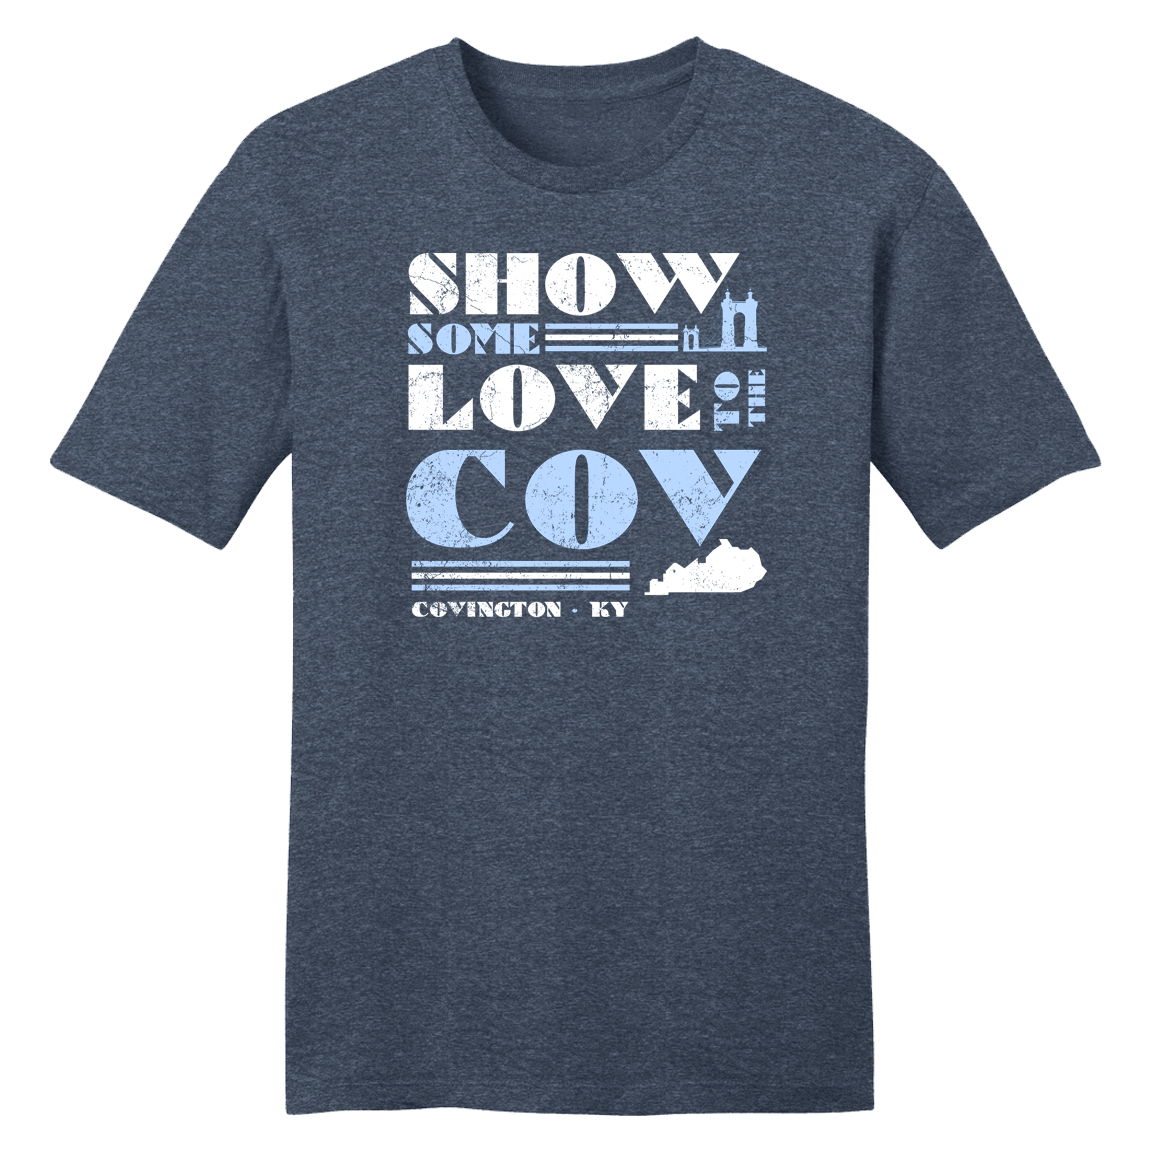 Show the Love to COV tee